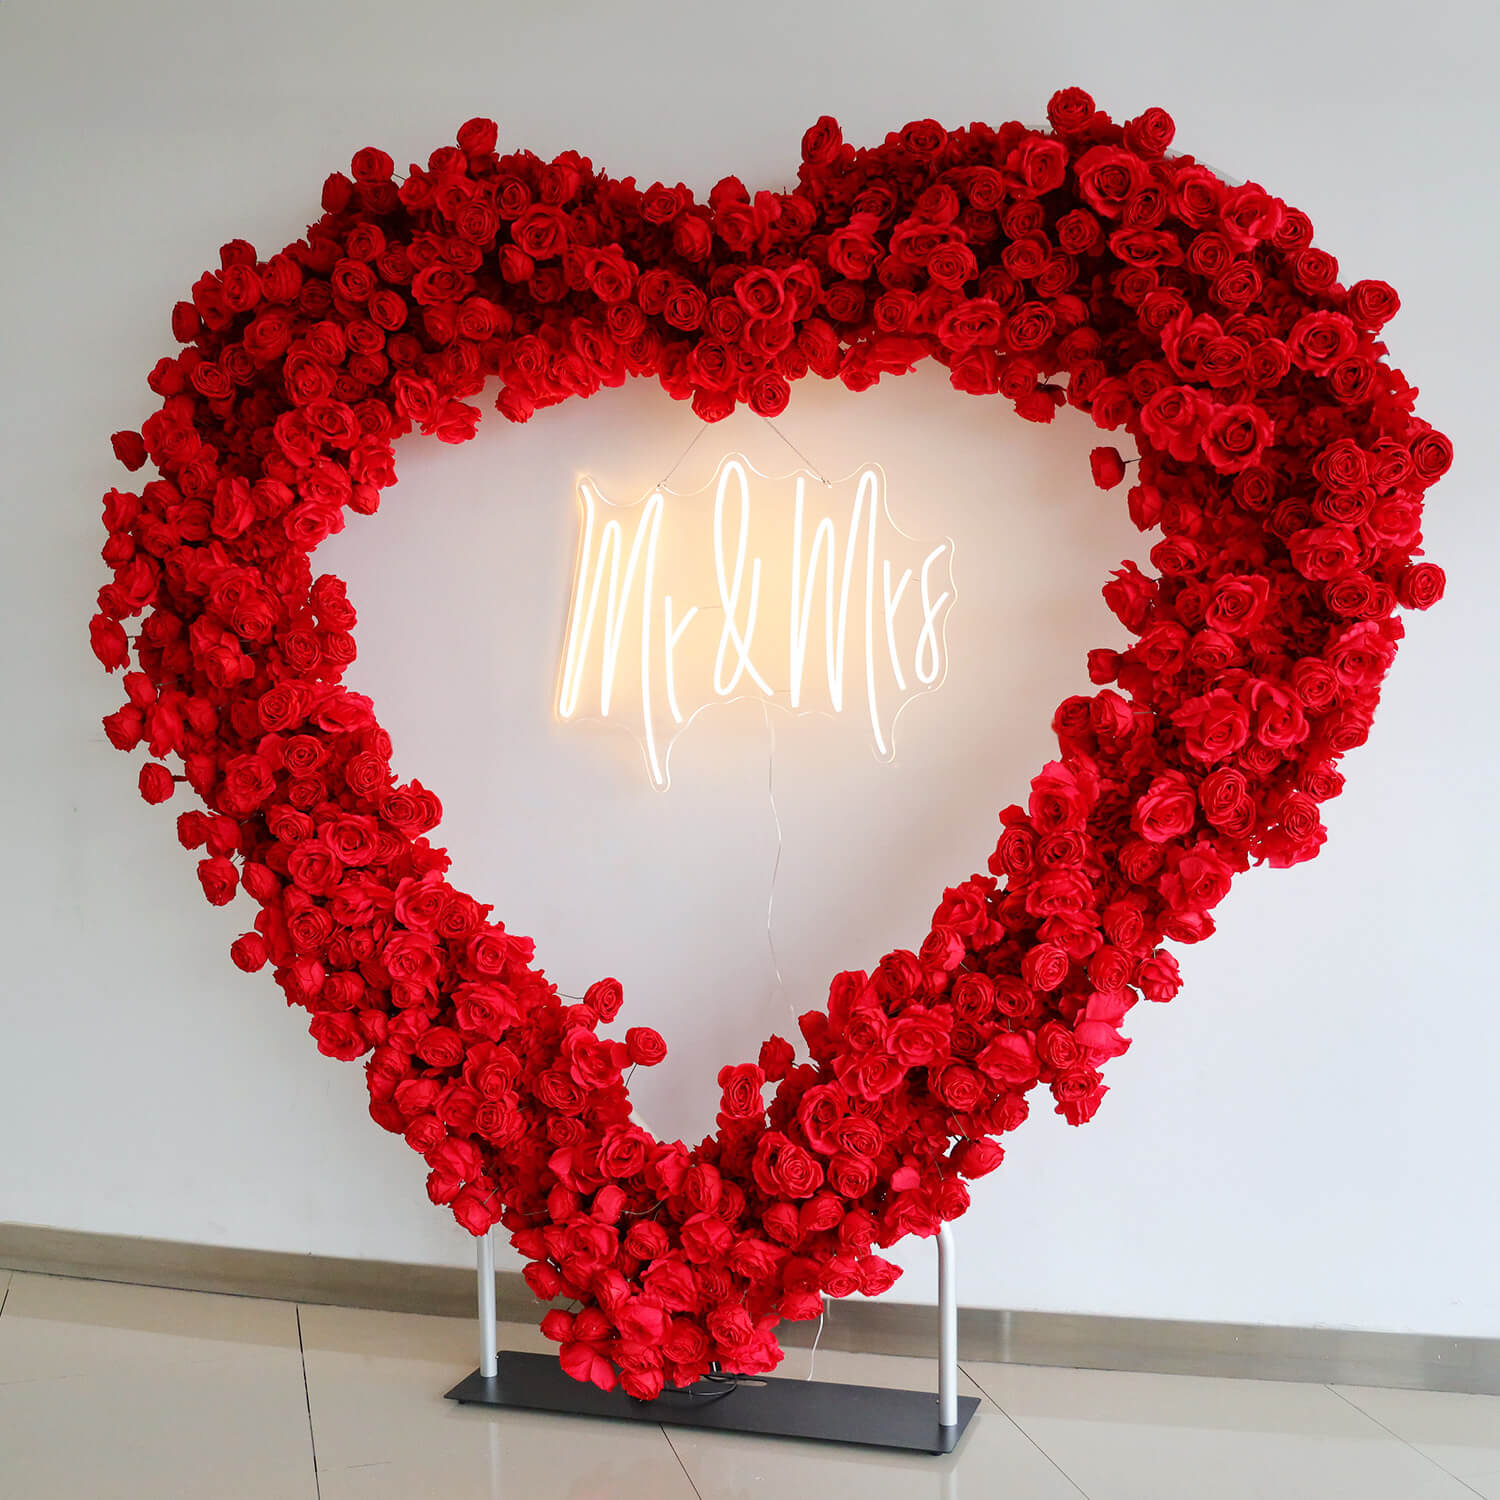 8ft Romantic Atmosphere Heart Shaped Red Rose Flower Wall Wedding